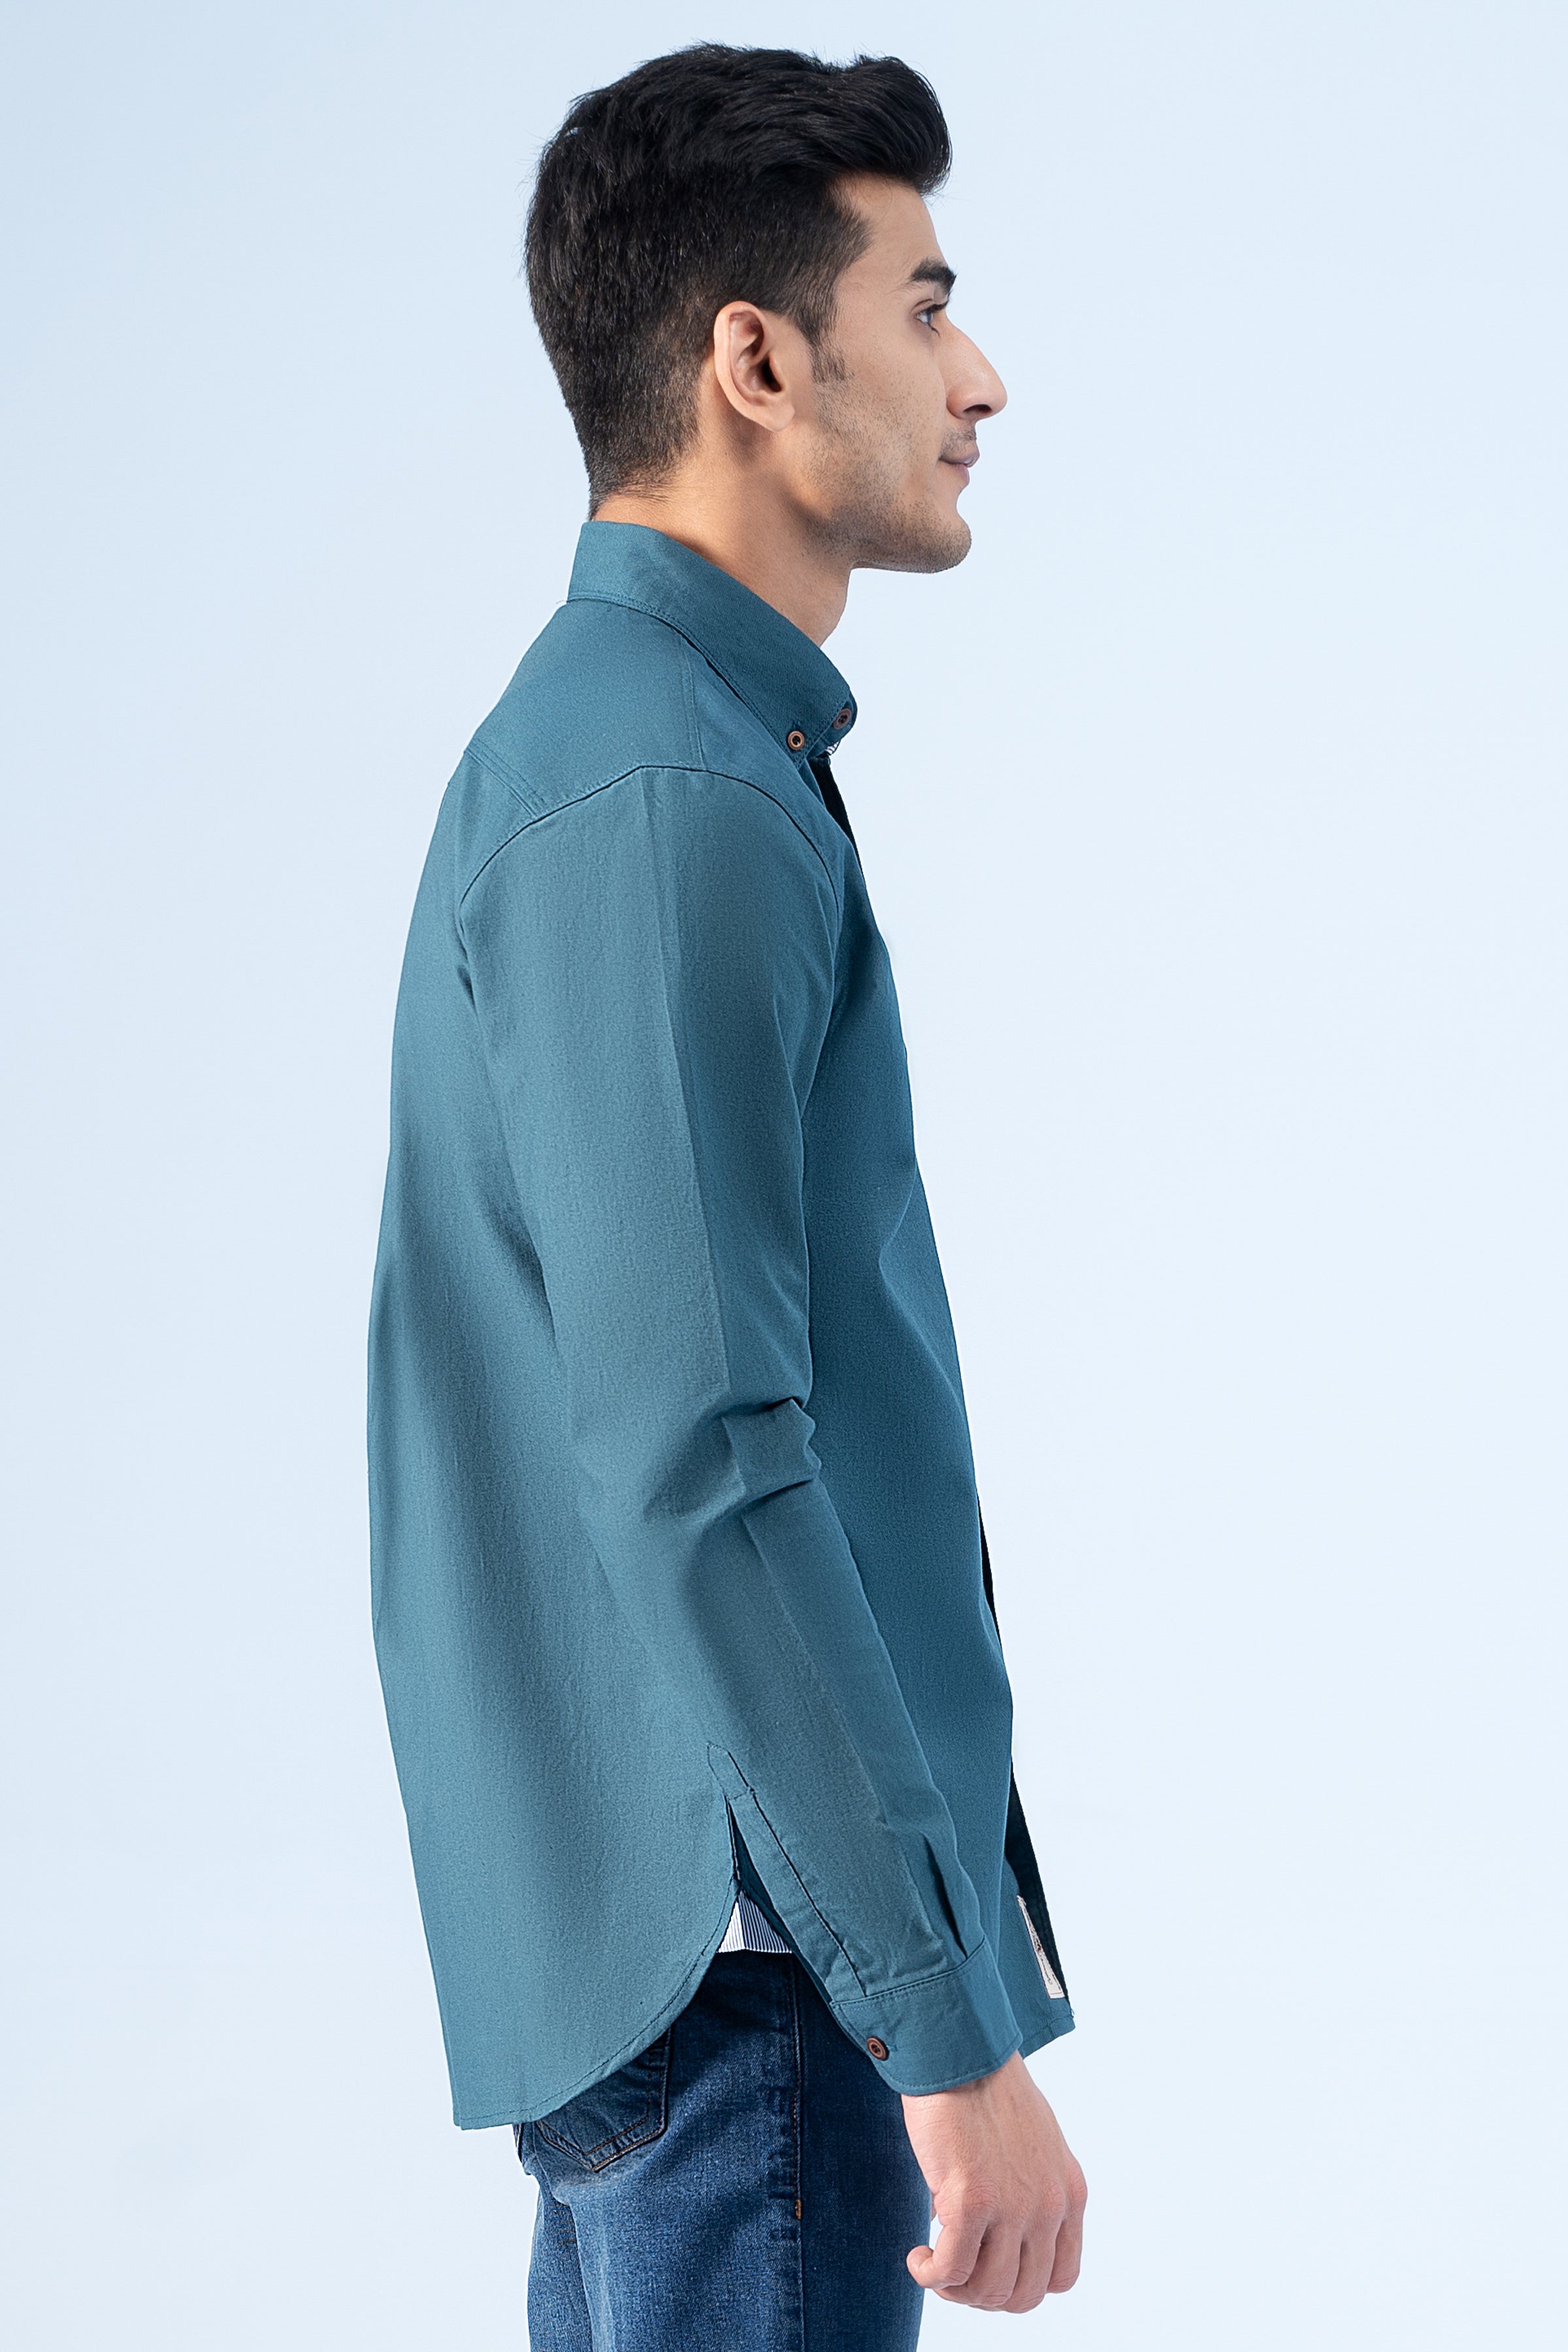 CASUAL SHIRT TEAL - Charcoal Clothing